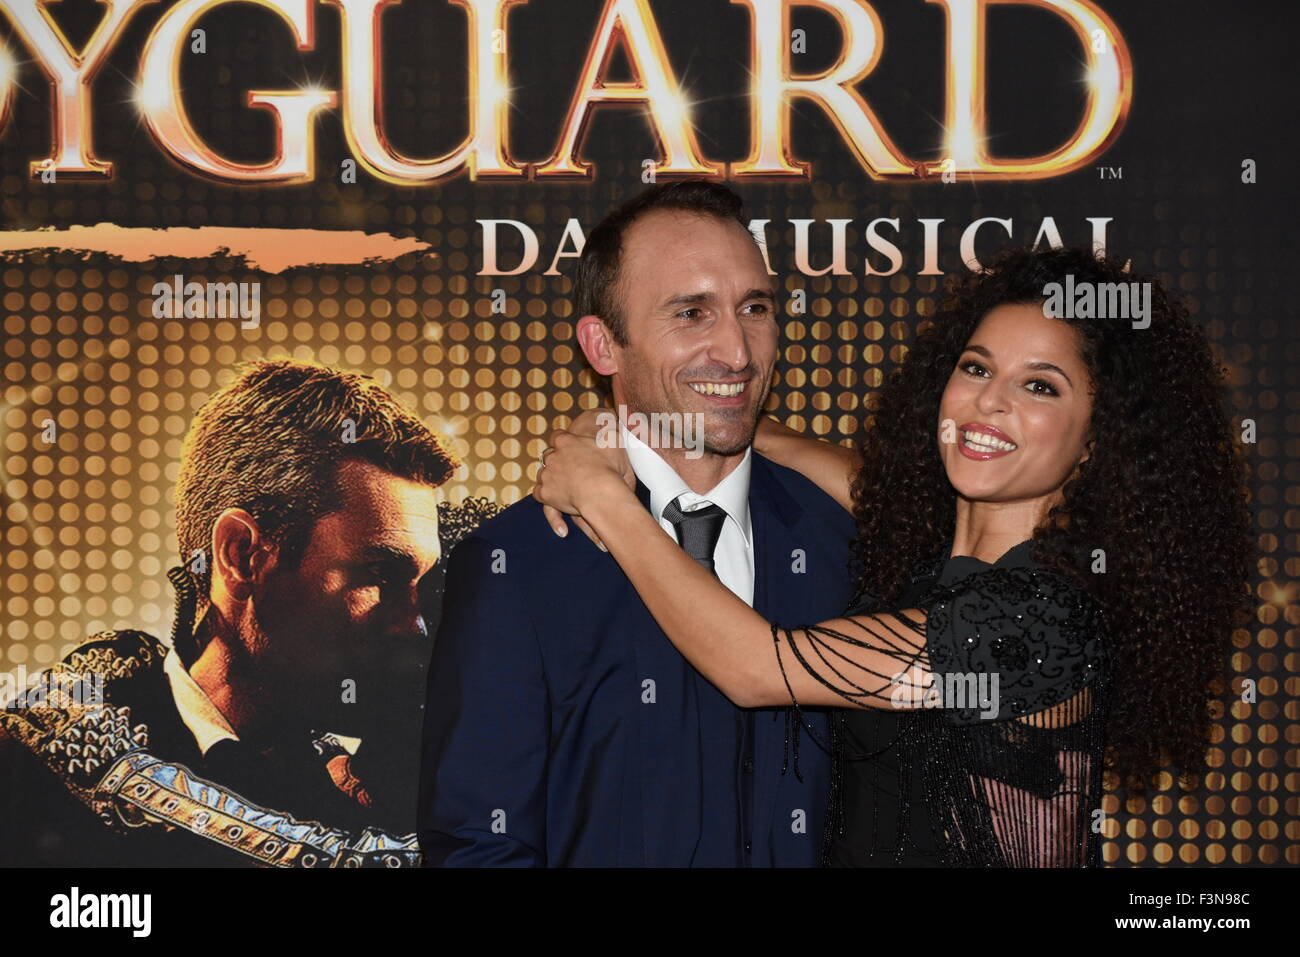 Cologne, Germany. 08th Oct, 2015. Leading performers Juergen Fischer (L) and Patricia Meeden pose during a press conference for the musical 'Bodyguard - The Musical' in Cologne, Germany, 08 October 2015. The musical will start its run at the Musical Dome in Cologne in November. Photo: Horst Galuschka/dpa - NO WIRE SERVICE -/dpa/Alamy Live News Stock Photo